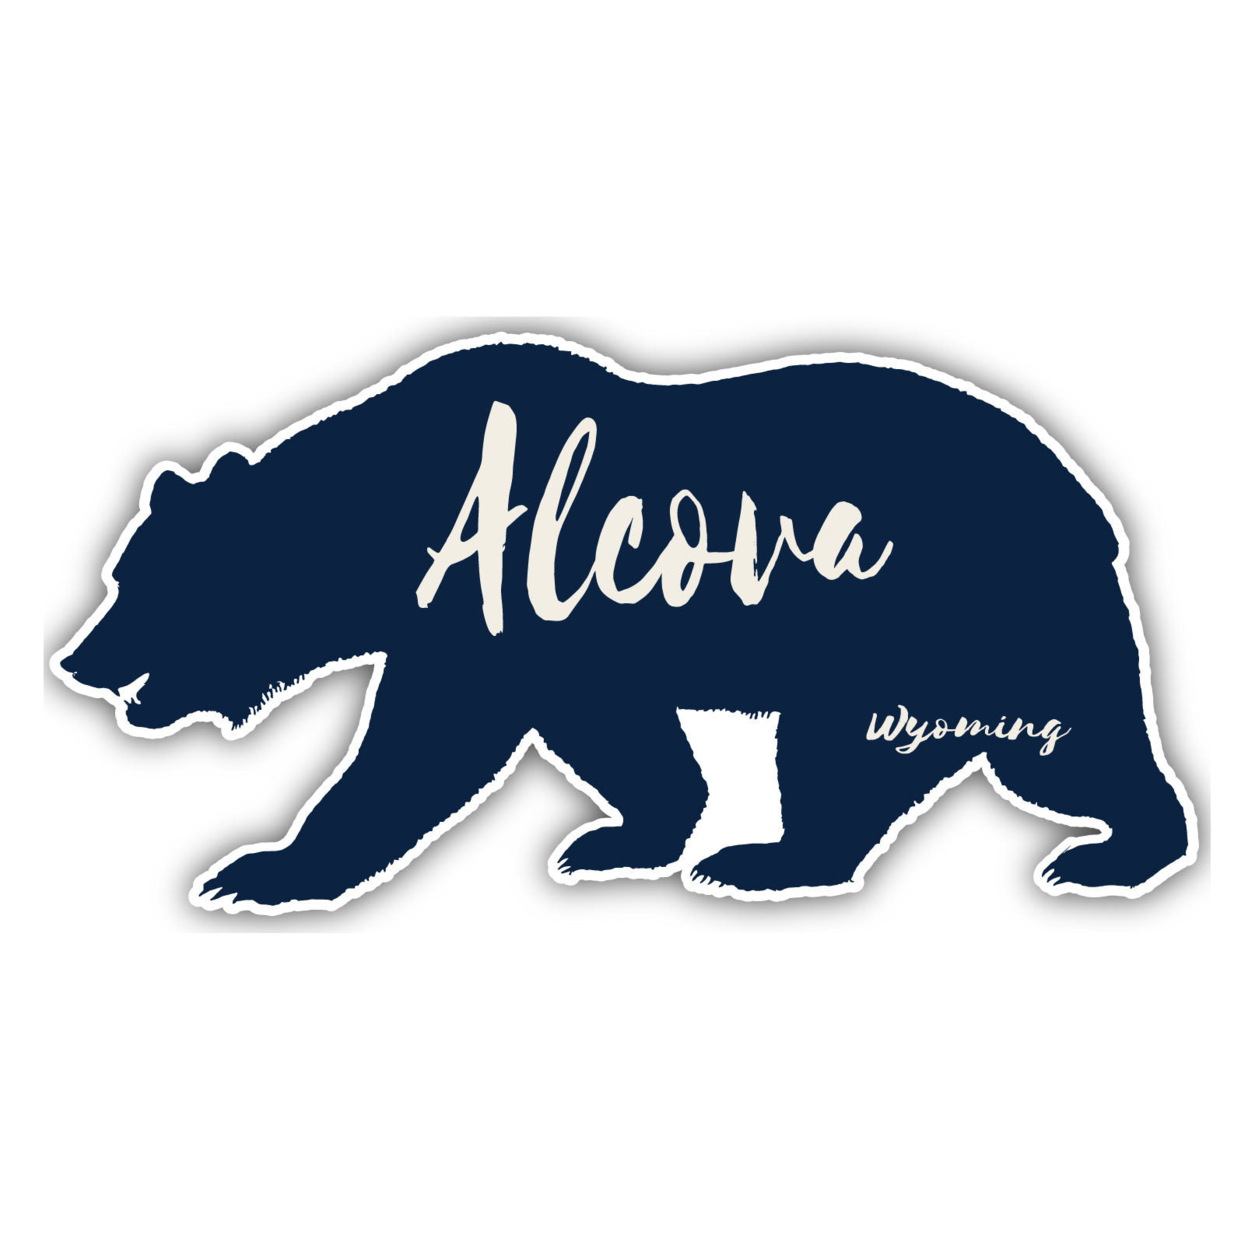 Alcova Wyoming Souvenir Decorative Stickers (Choose Theme And Size) - 4-Pack, 8-Inch, Bear